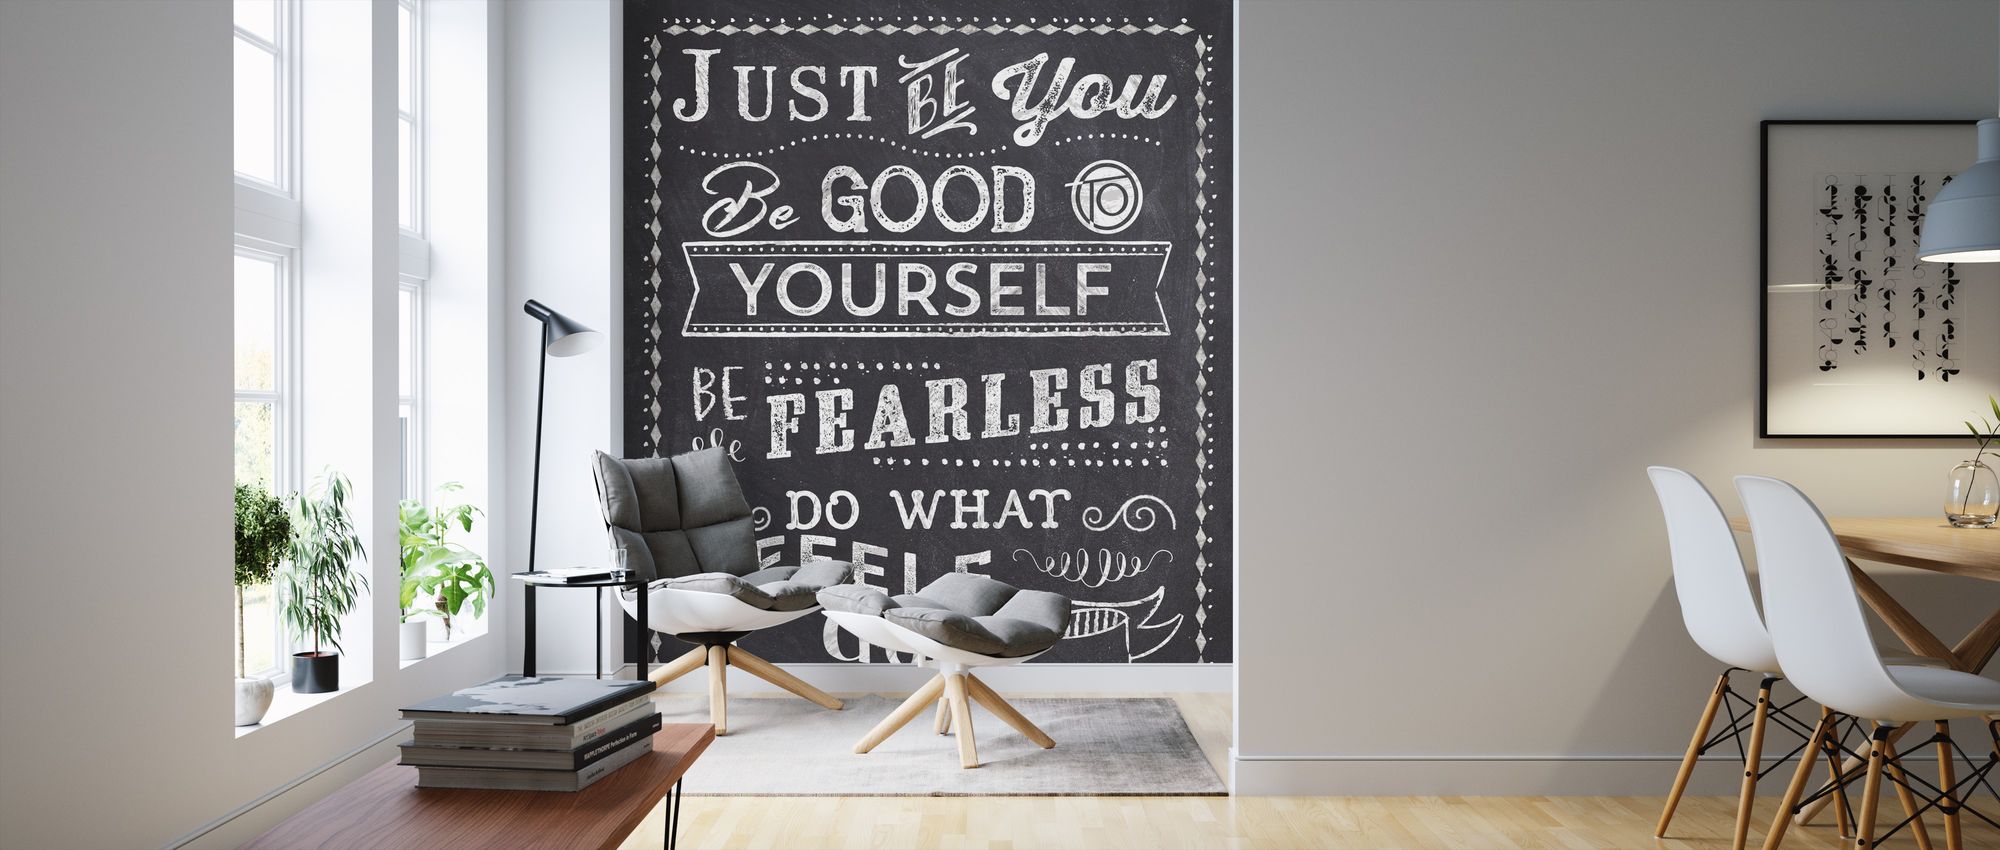 Just Be You Ii Decorate With A Wall Mural Photowall